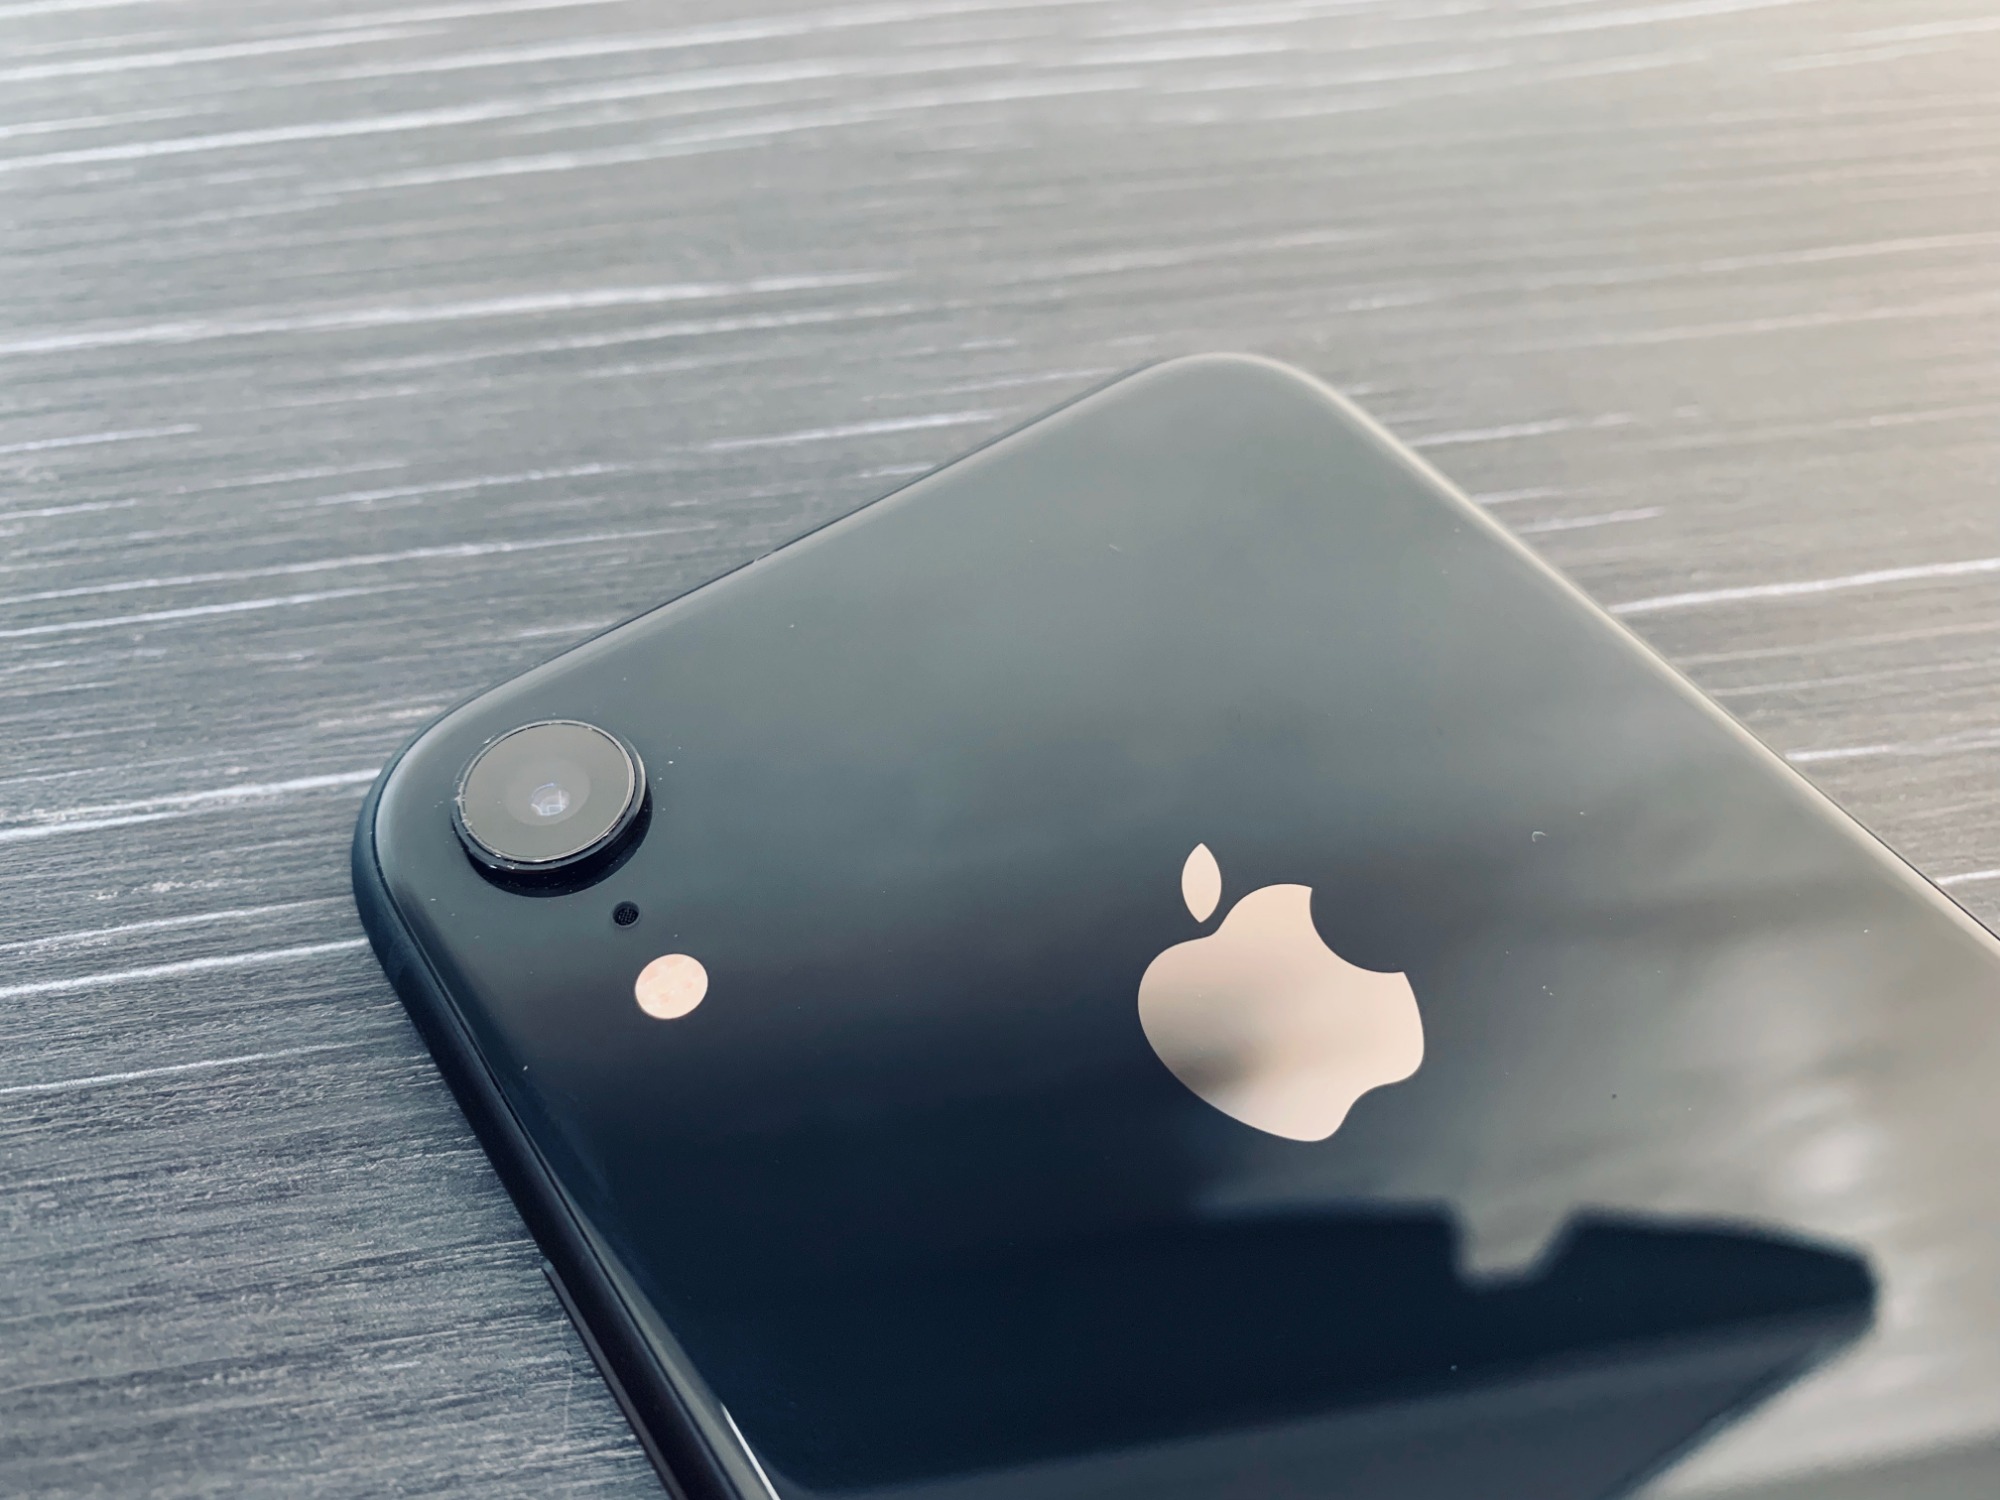 Apple iPhone XR 64GB Space Gray